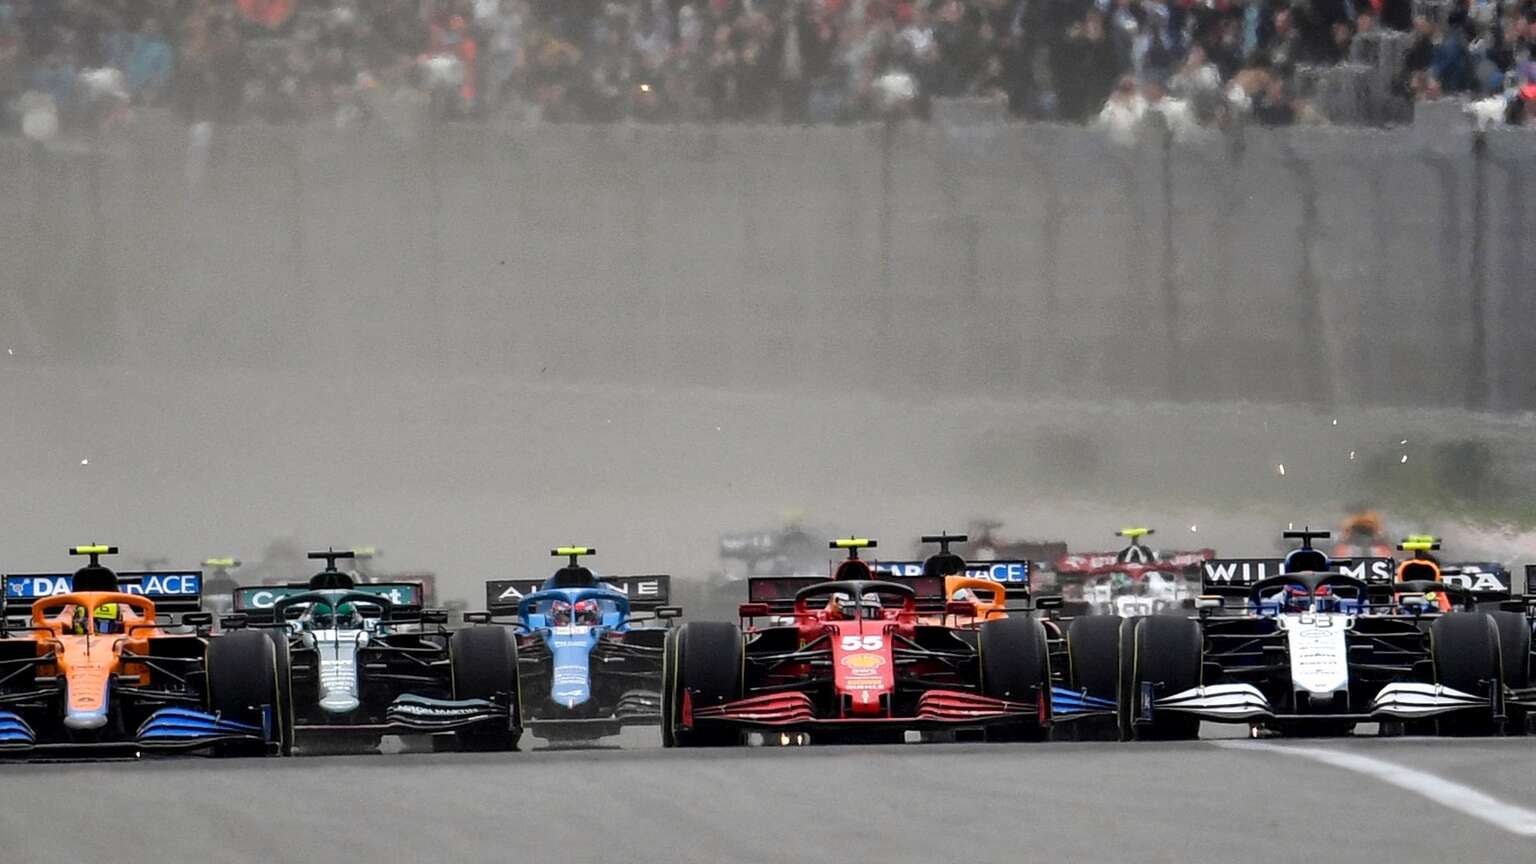 ESPN Announces Details of Deal to Keep Formula 1 Racing Through 2025 Season, With New ESPN+ 